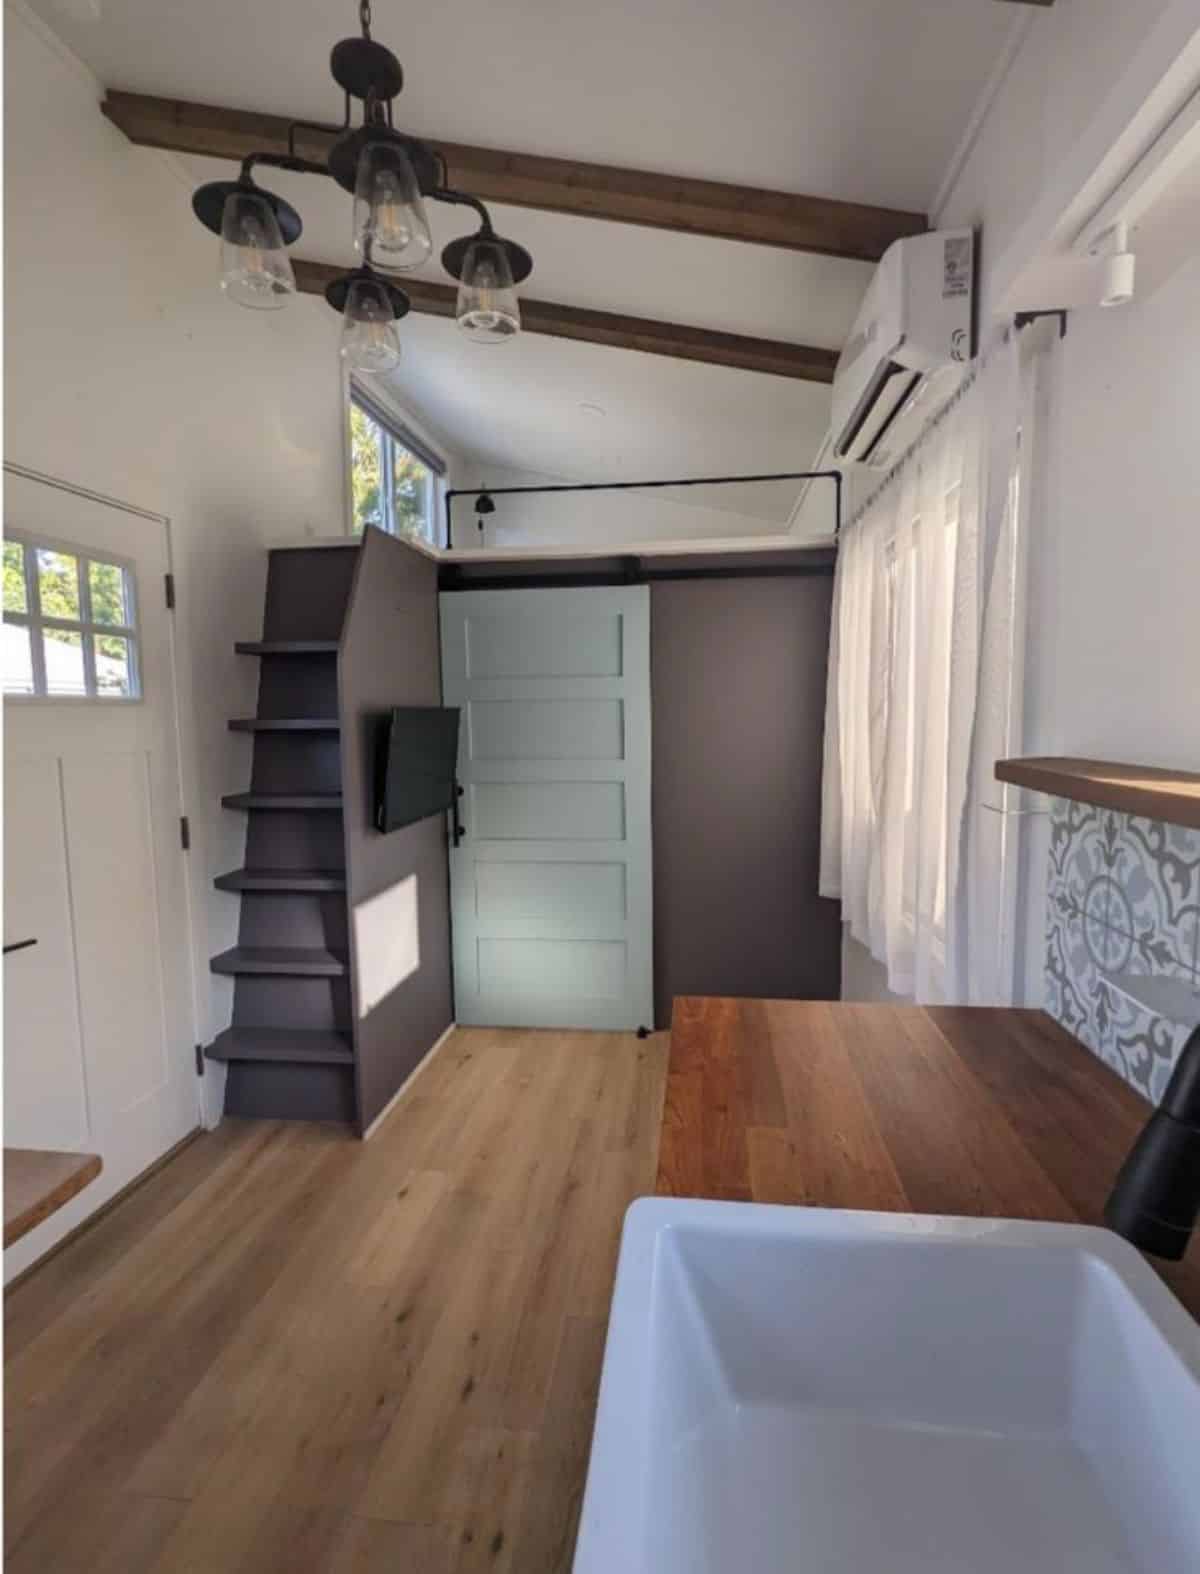 living area opposite to the main entrance door is small  and stunning stairs leading to loft 2 of three bedroom tiny house